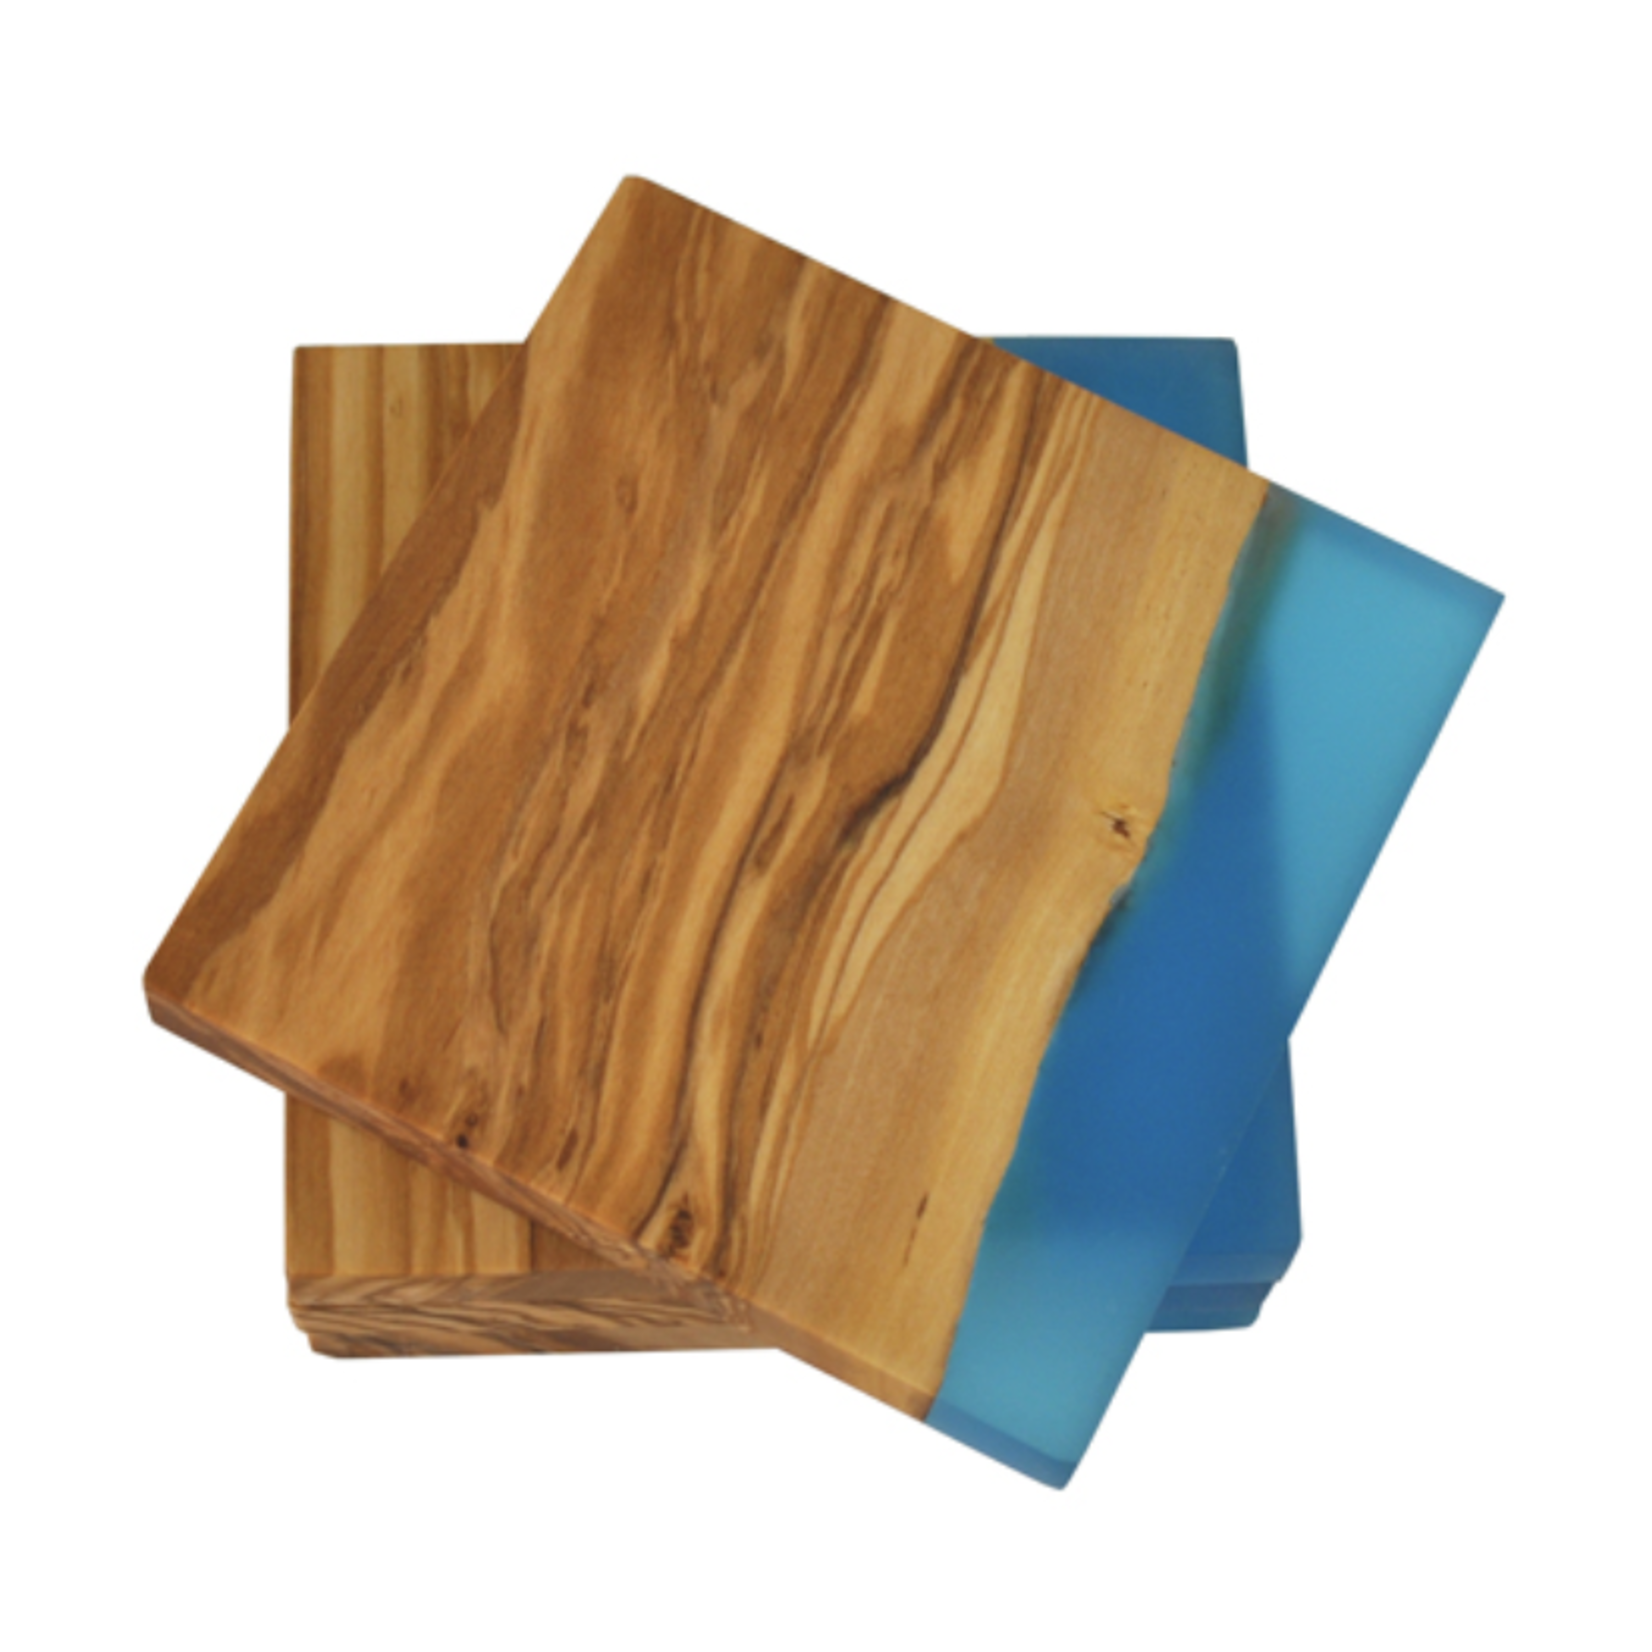 Naturally Med Olive Wood Square Coasters with Blue Resin Shoreline. Set of 4